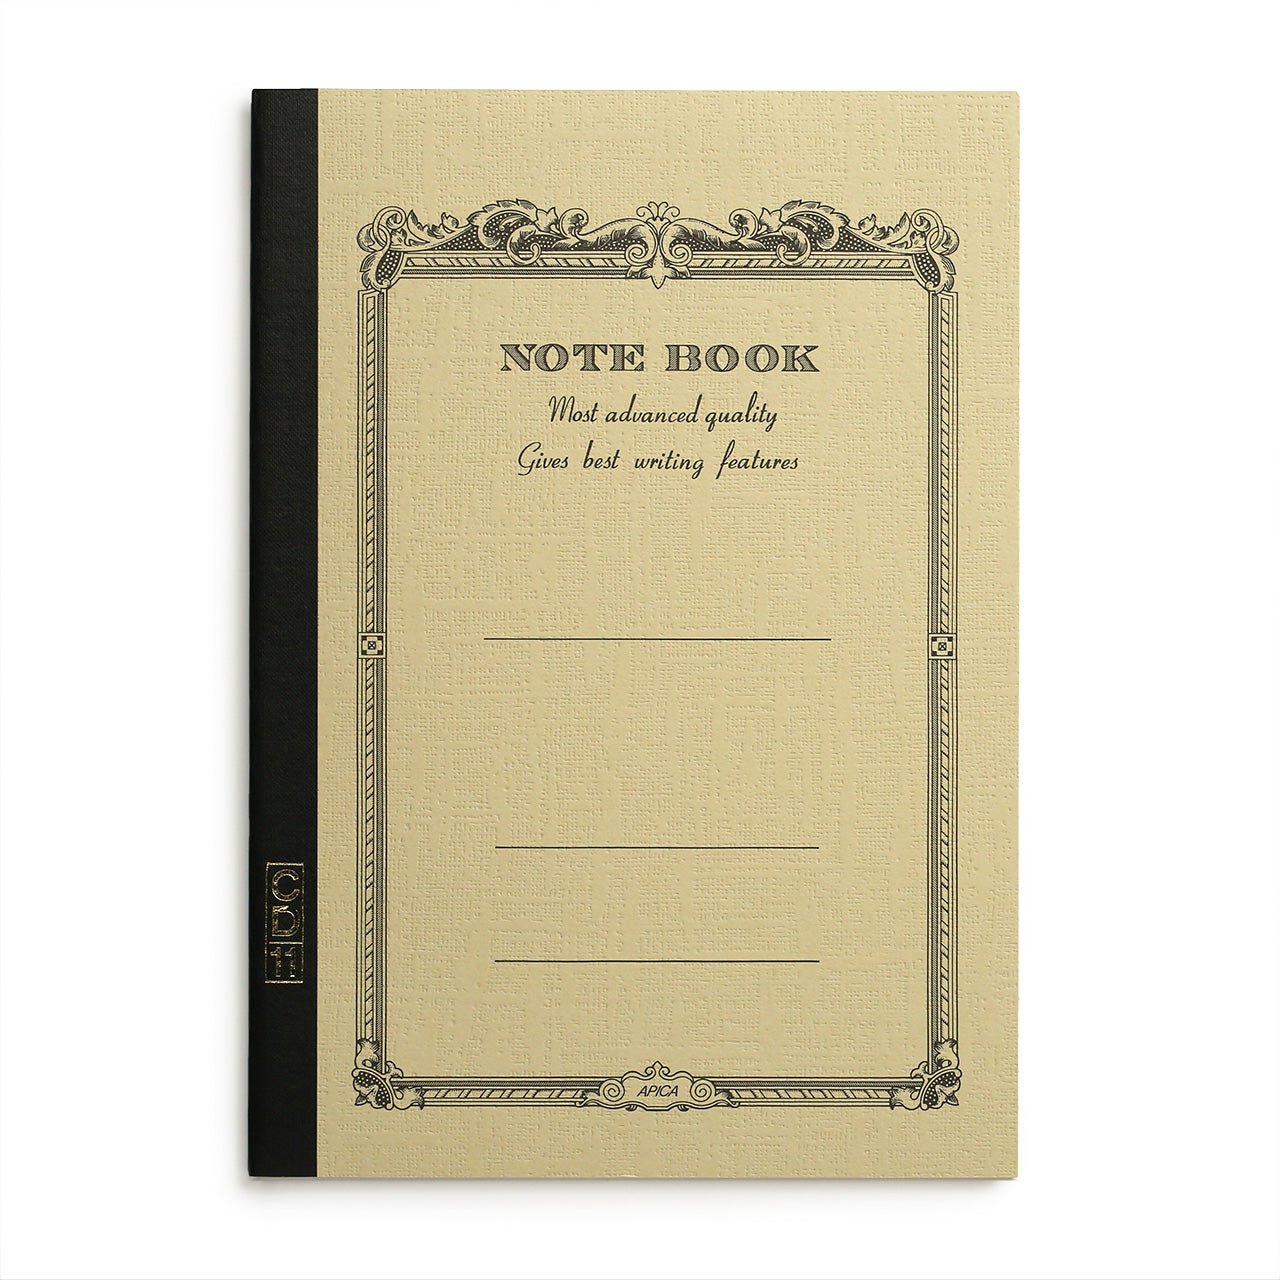 Apica smooth papered, lined notebook with  navy cover and black spine